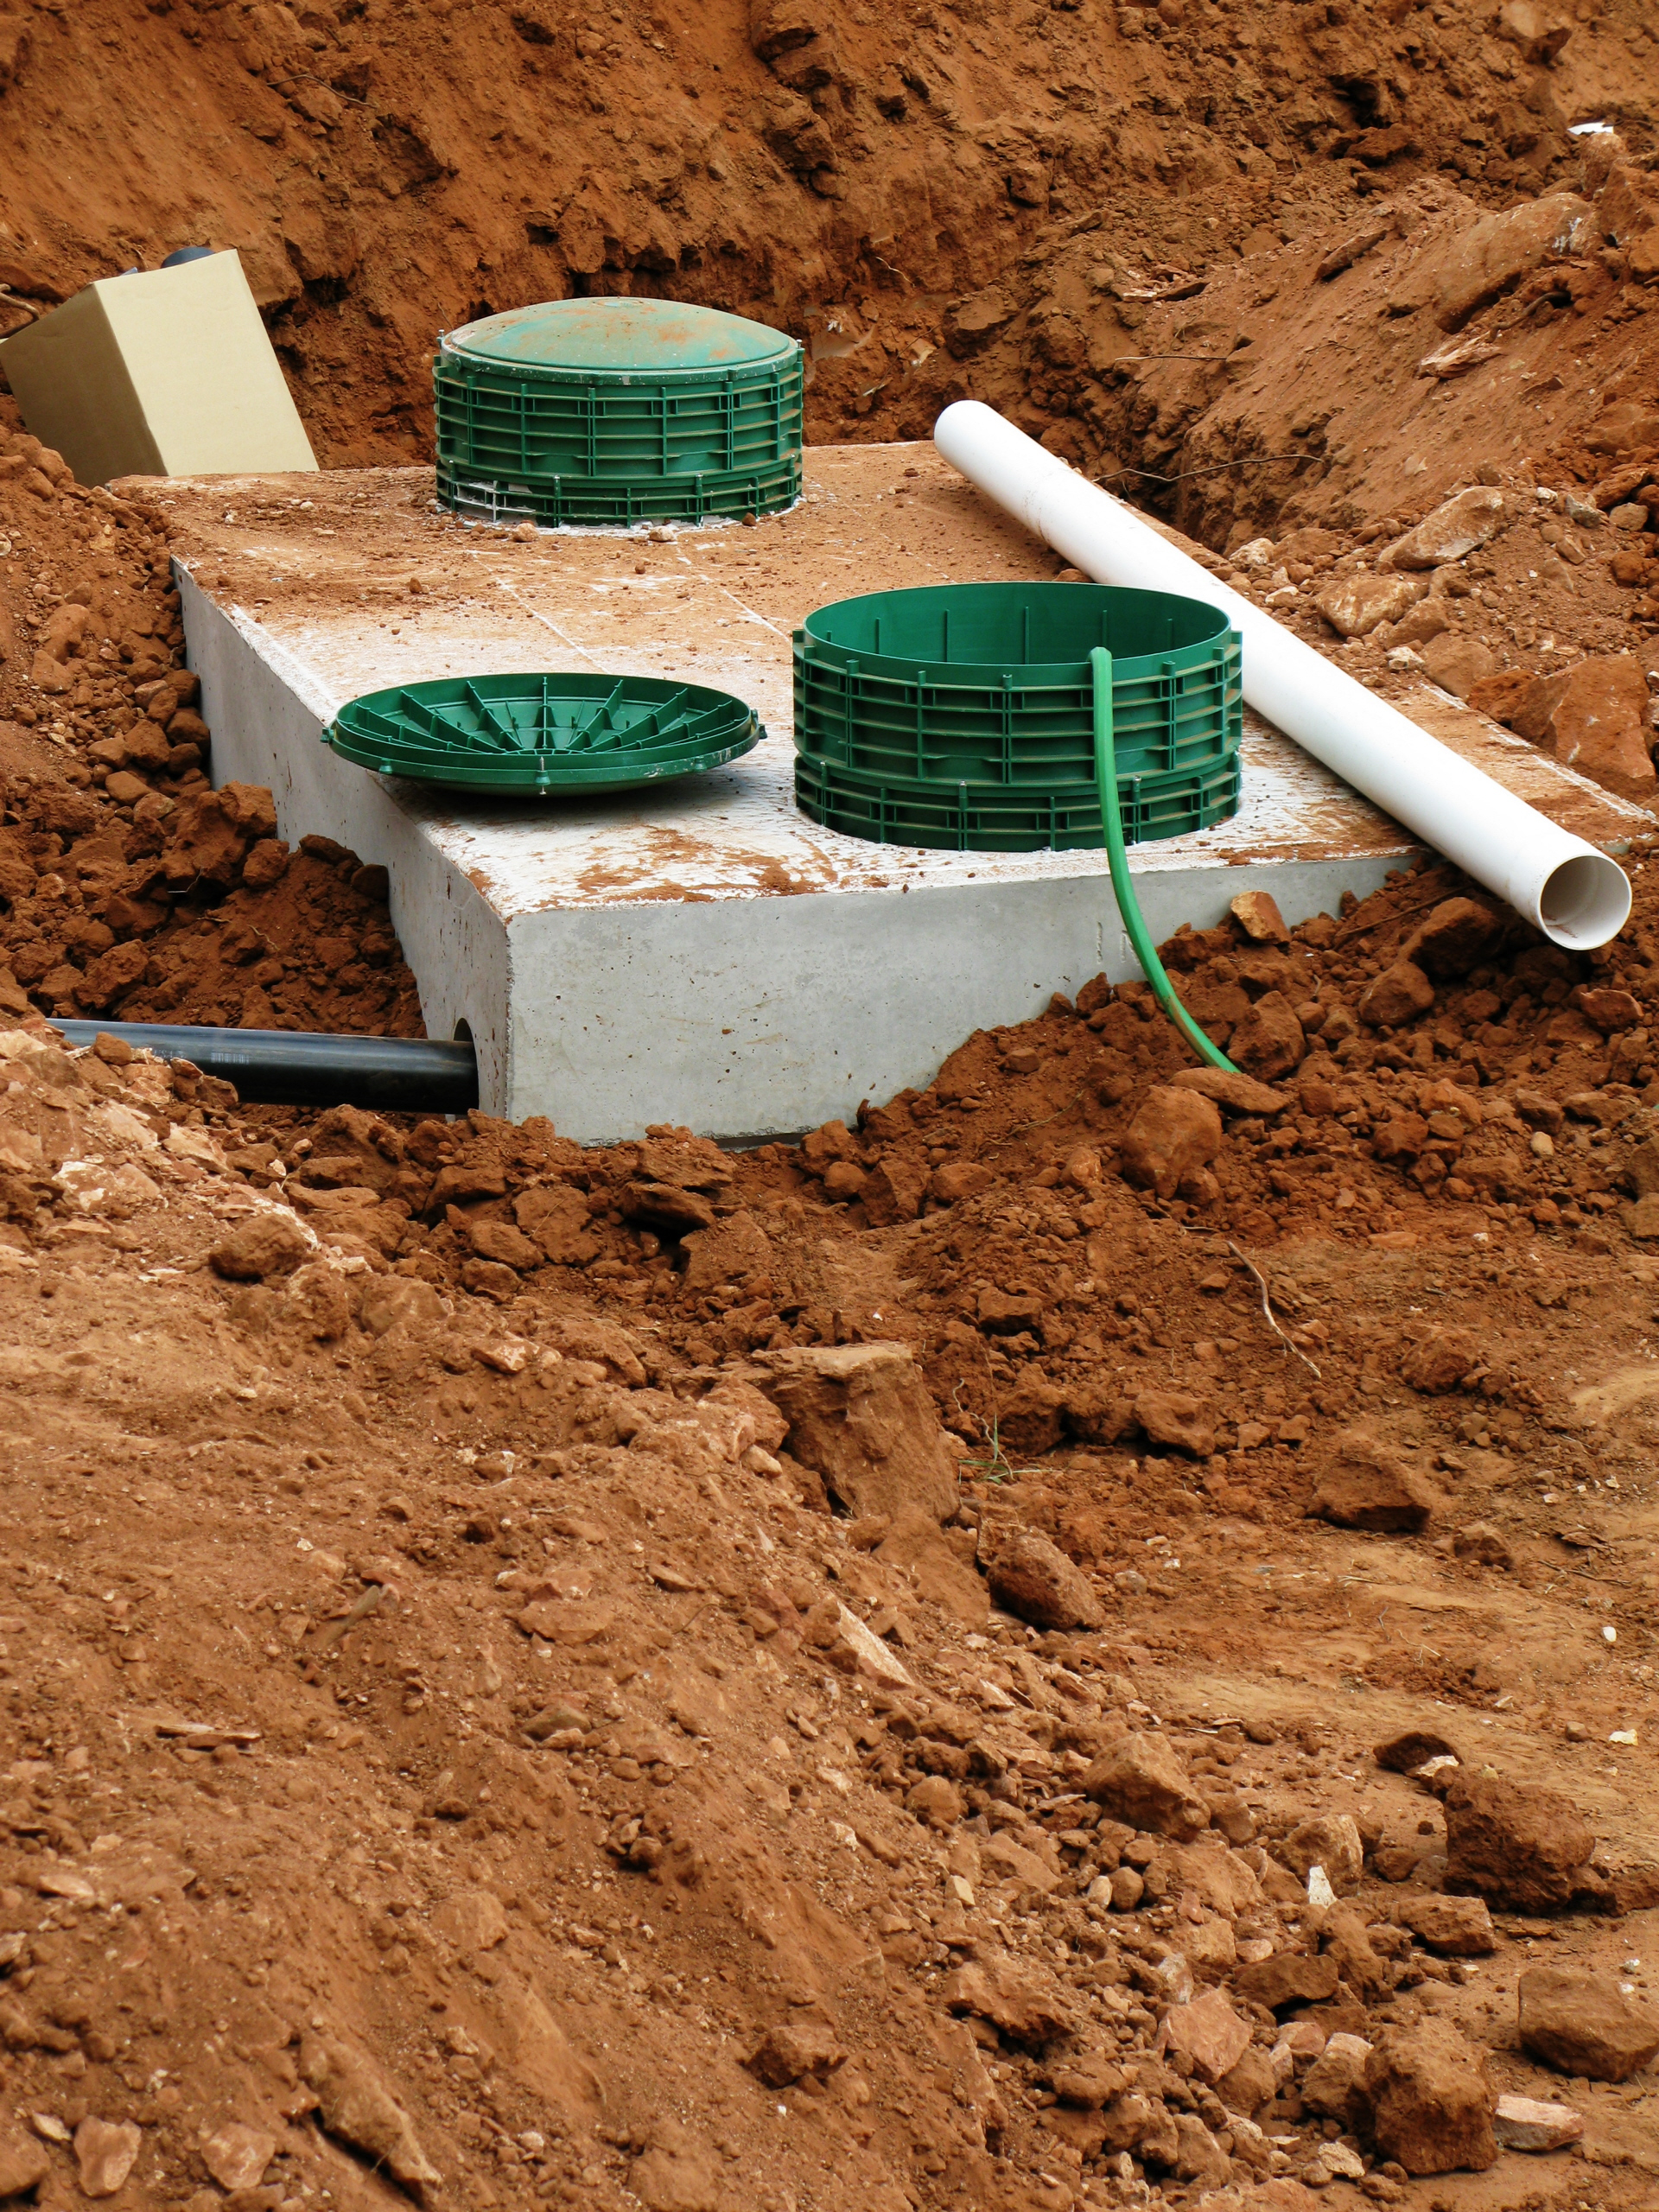 Septic tank installation in progress with exposed pipes and green lids on a construction site